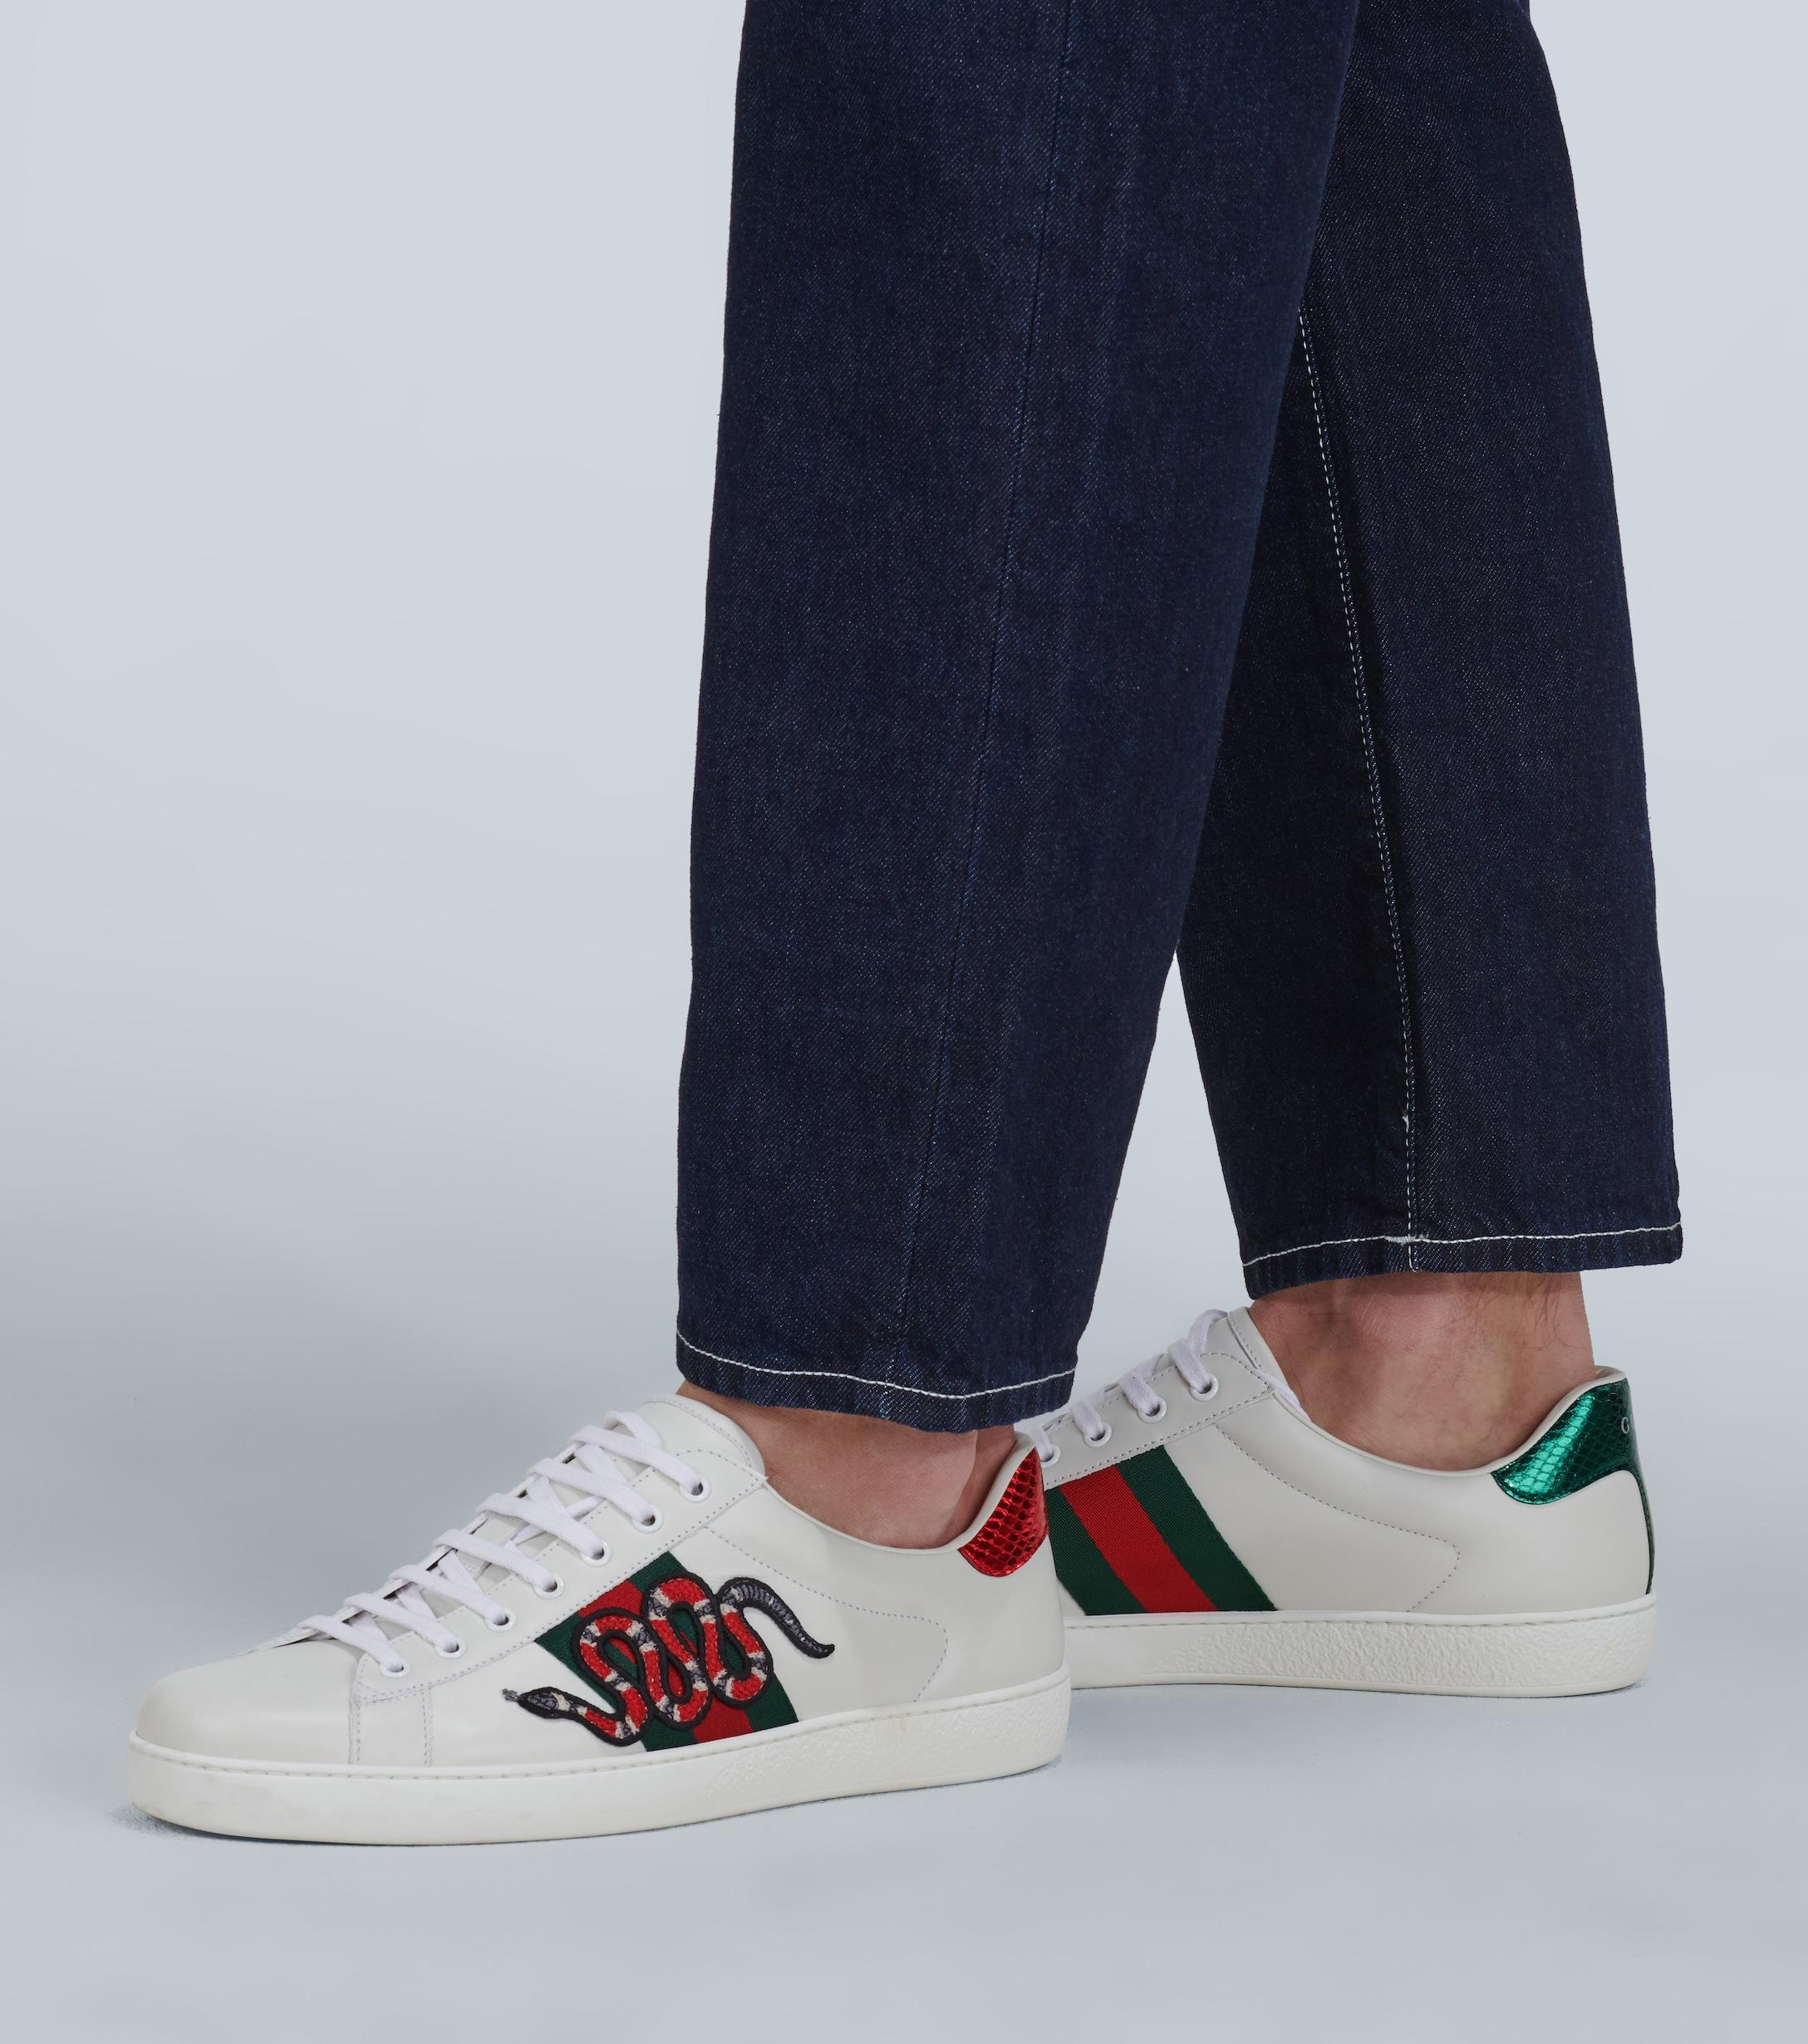 Gucci Snake Ace Embroidered Leather 